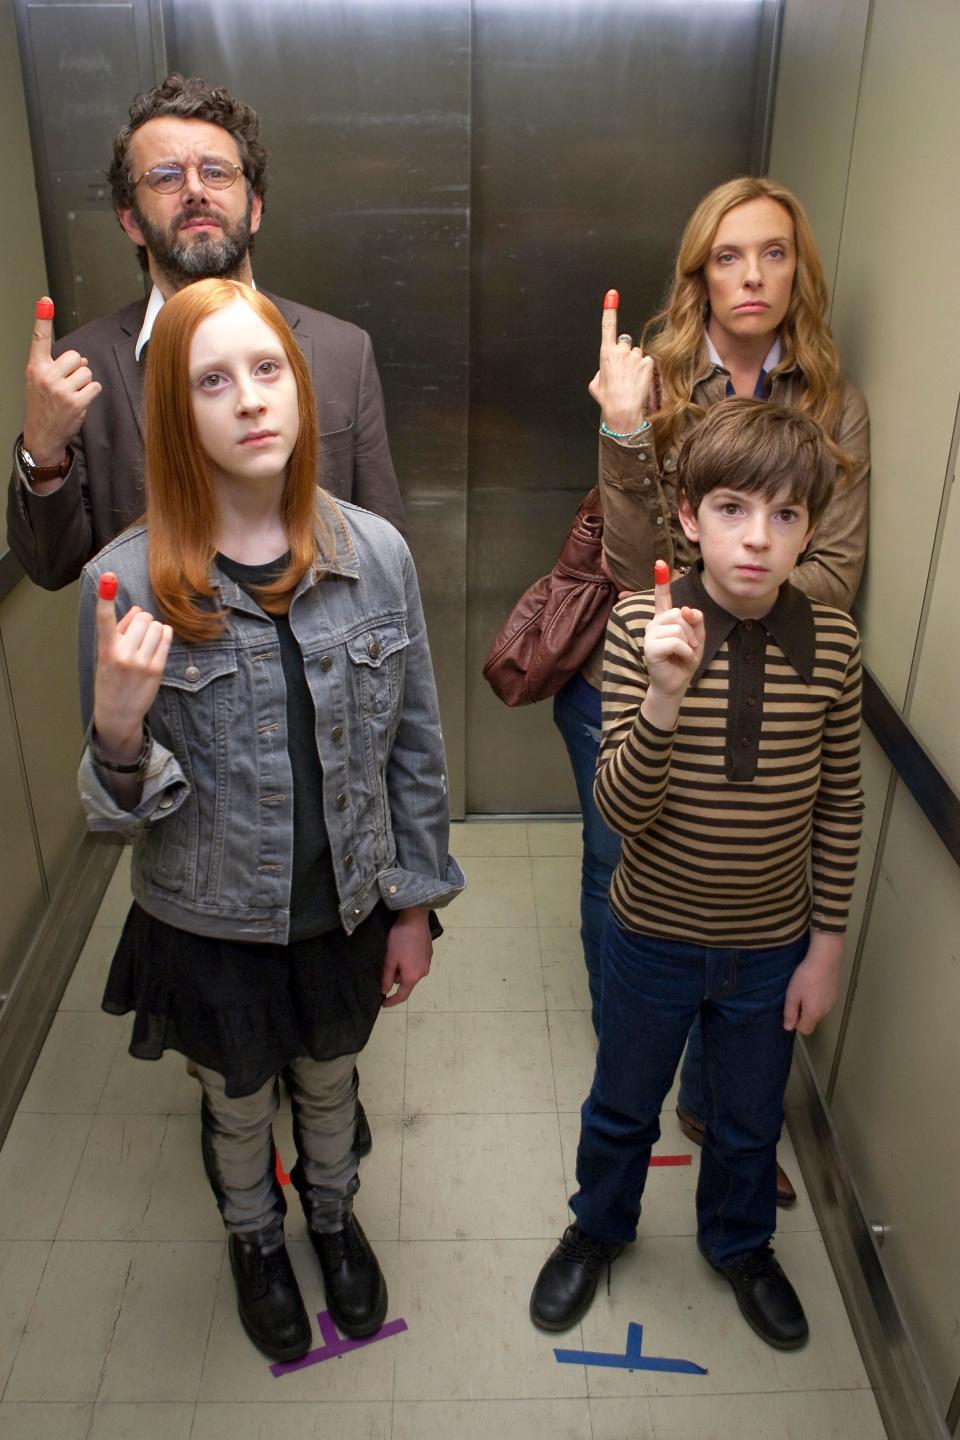 Clockwise from front left, Samantha Weinstein, Michael Sheen, Toni Collette and Jason Spevack in a scene from the motion picture "Jesus Henry Christ."